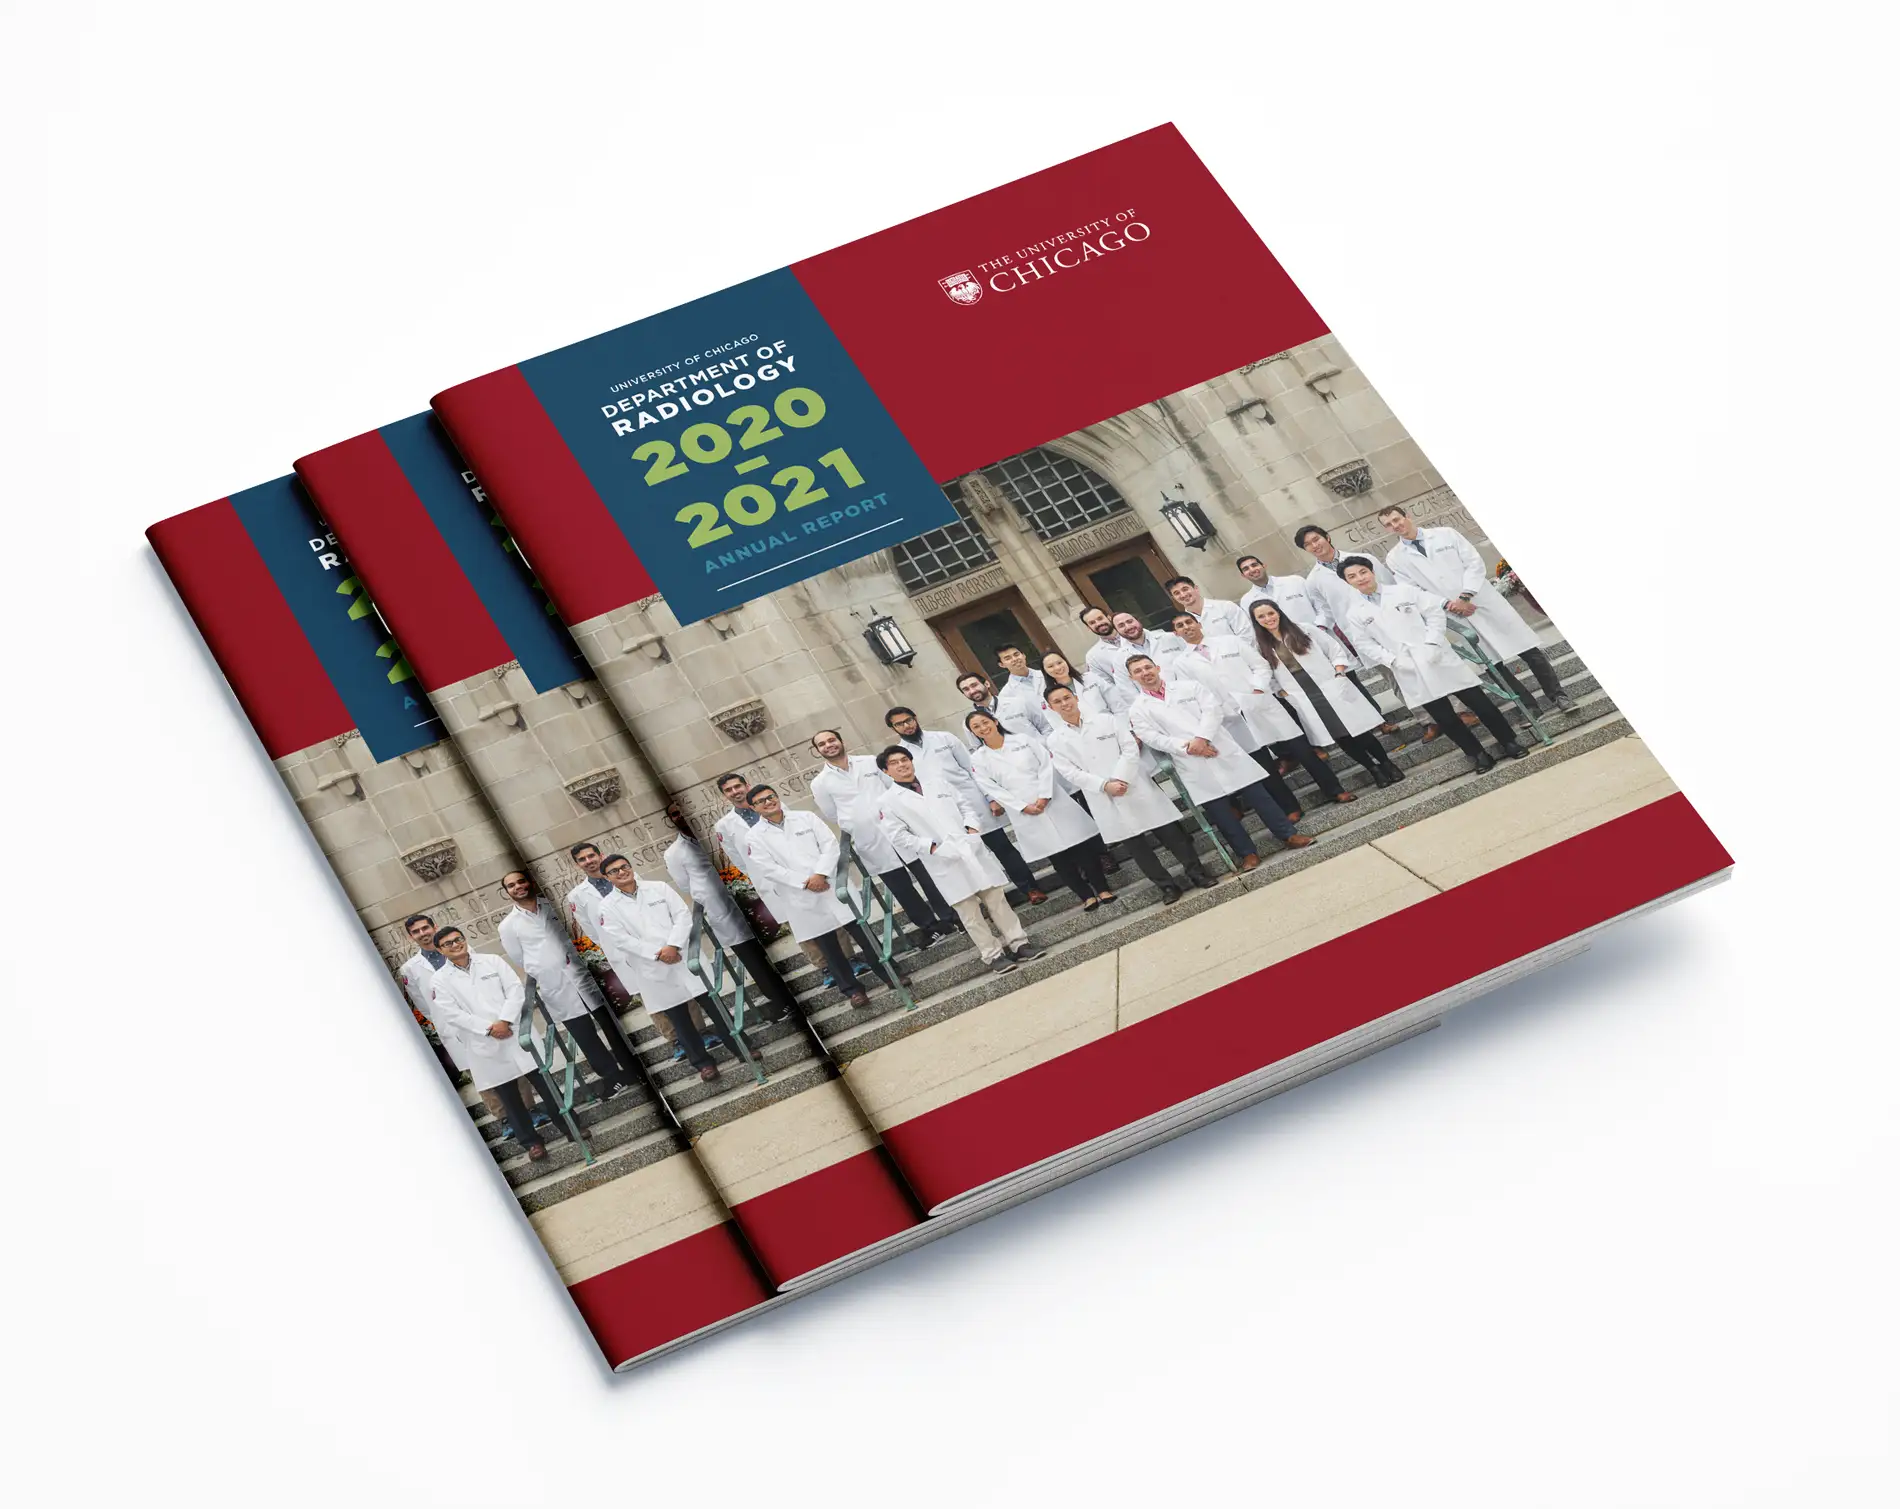 University of Chicago Department of Radiology annual report design